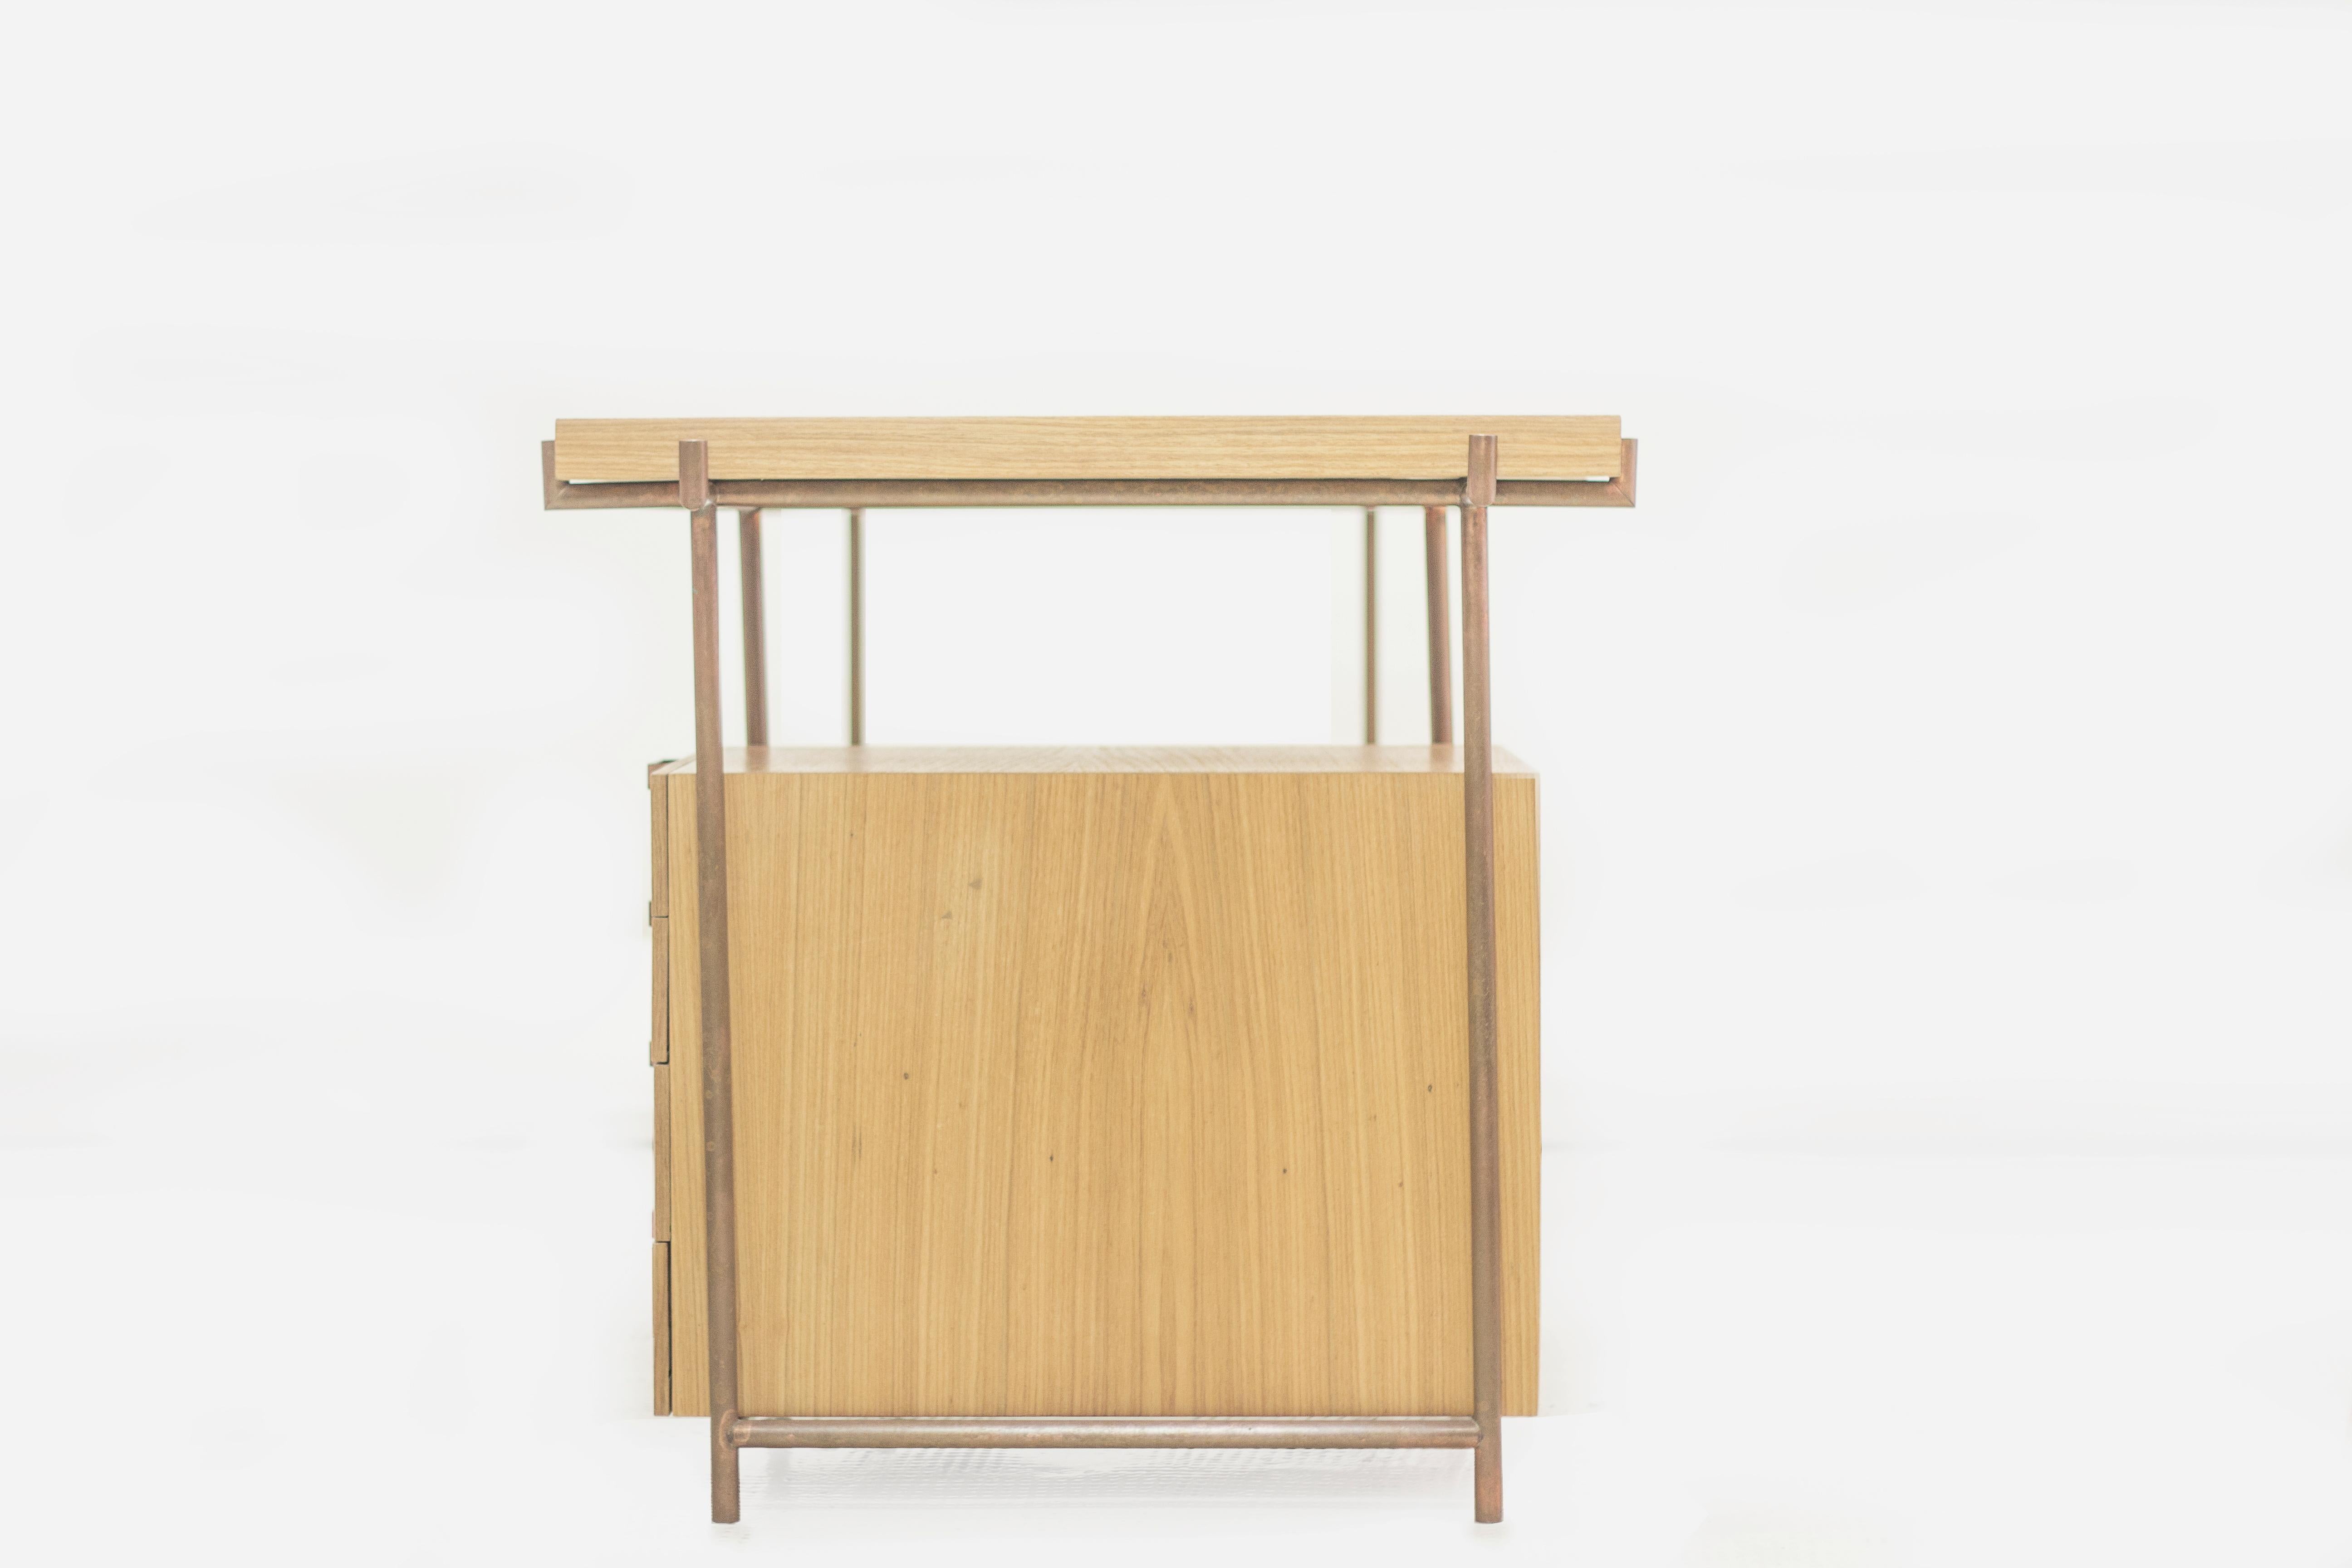 Contemporary Brazilian Wood and Copper Desk with Drawers, Mid Century Brazilian Modern  For Sale